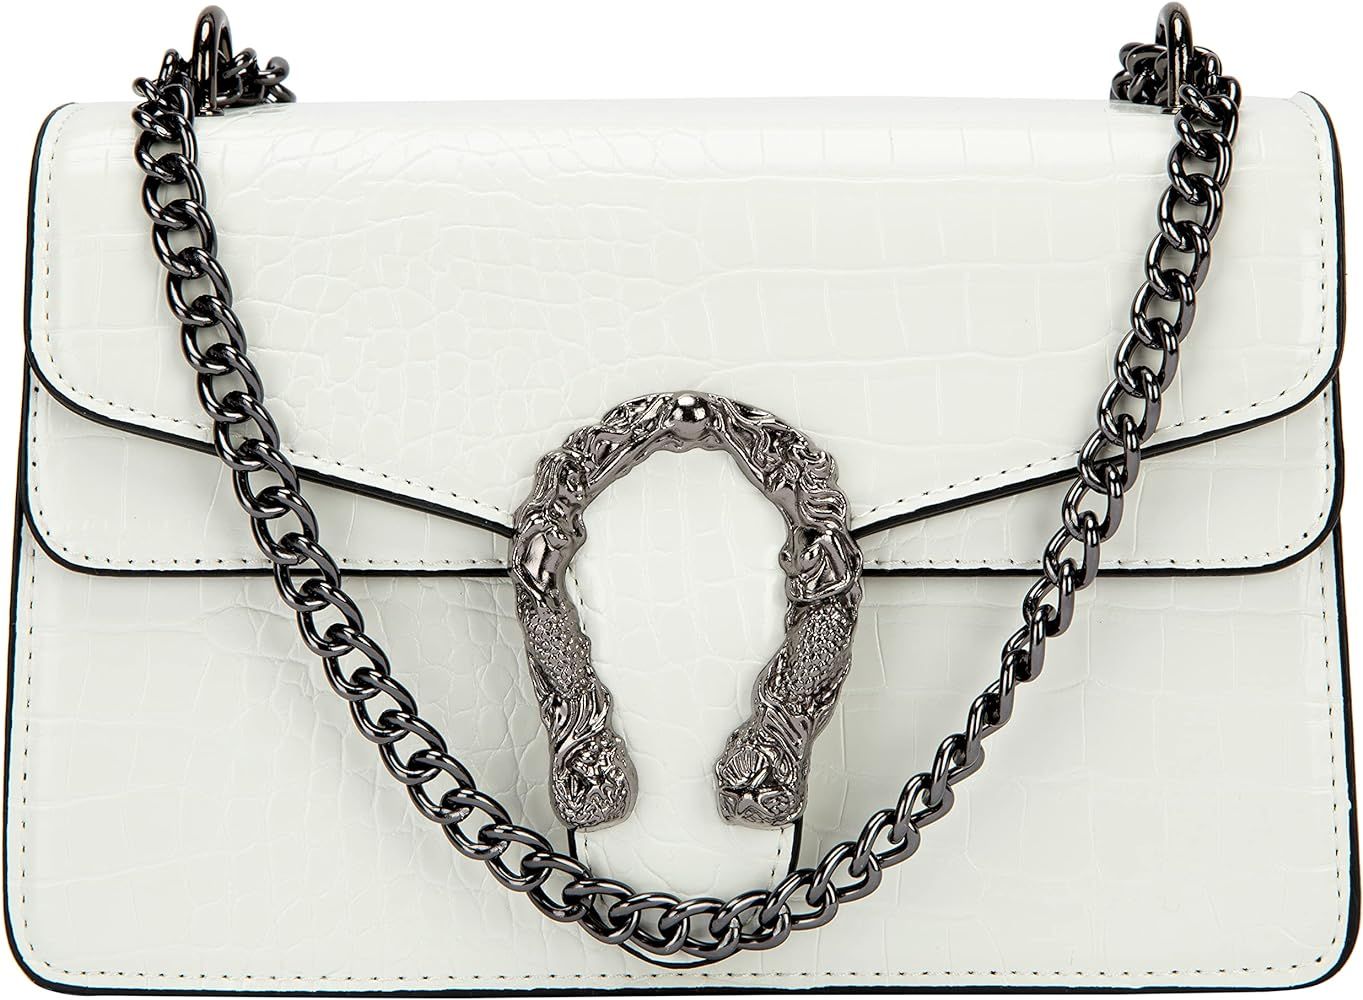 Trendy Chain Strap Crossbody Bag For Women - Luxurious Snakeskin-Print Leather Shoulder Pursel Ladie | Amazon (US)